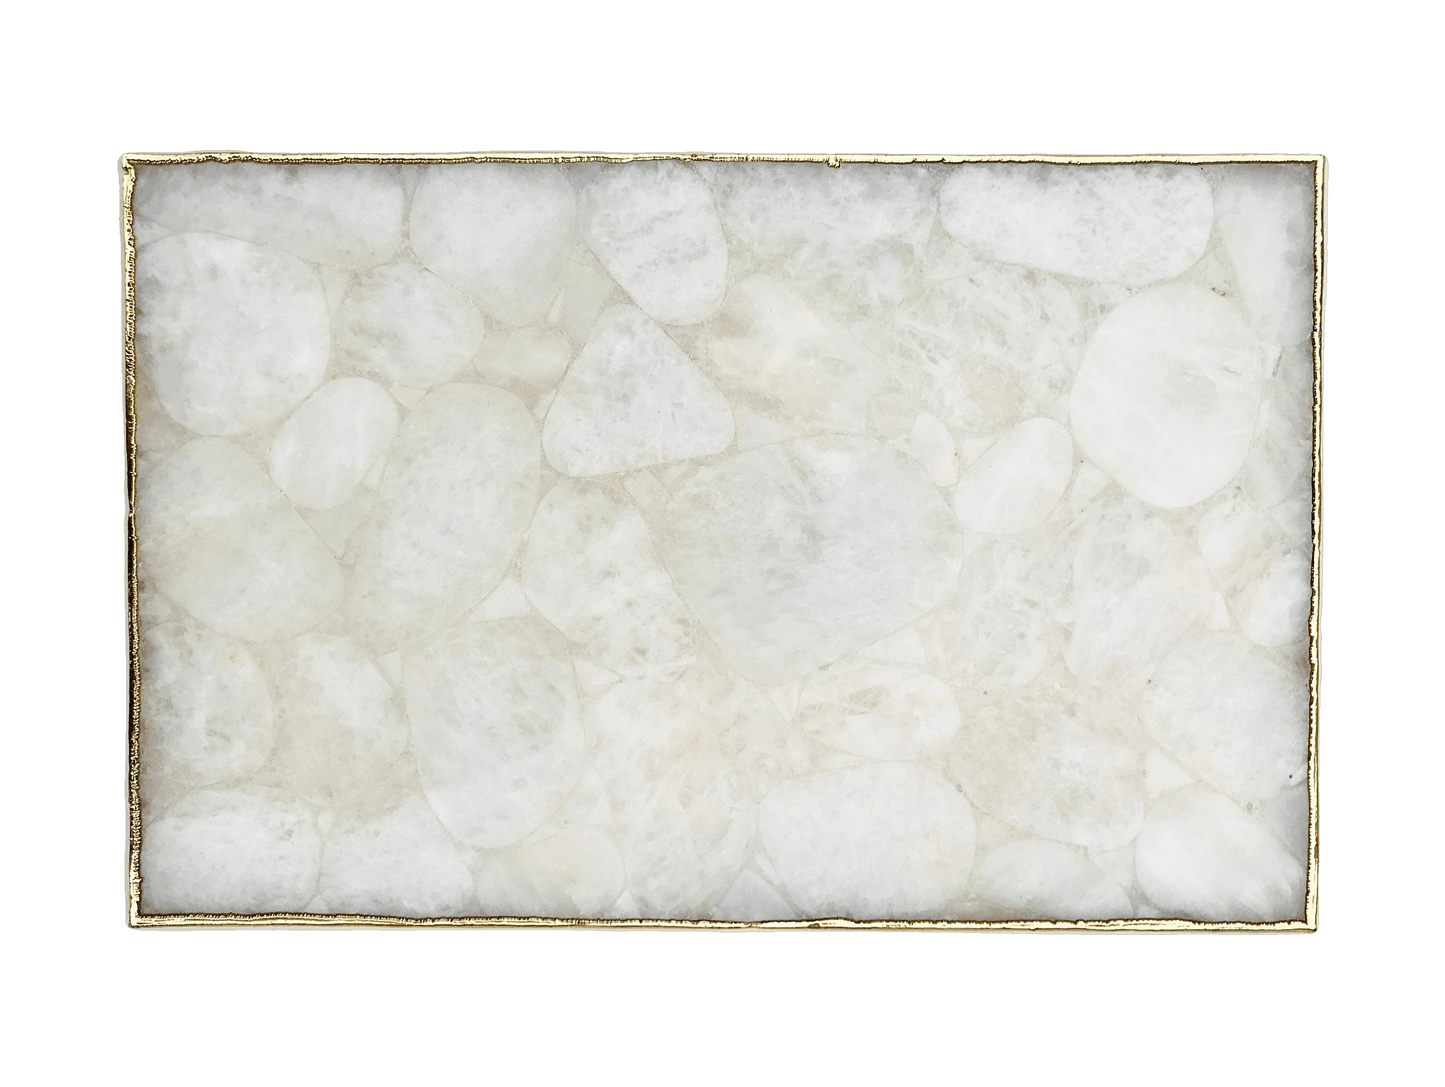 Large White Crystal Agate Cheese Platter Tray - MAIA HOMES